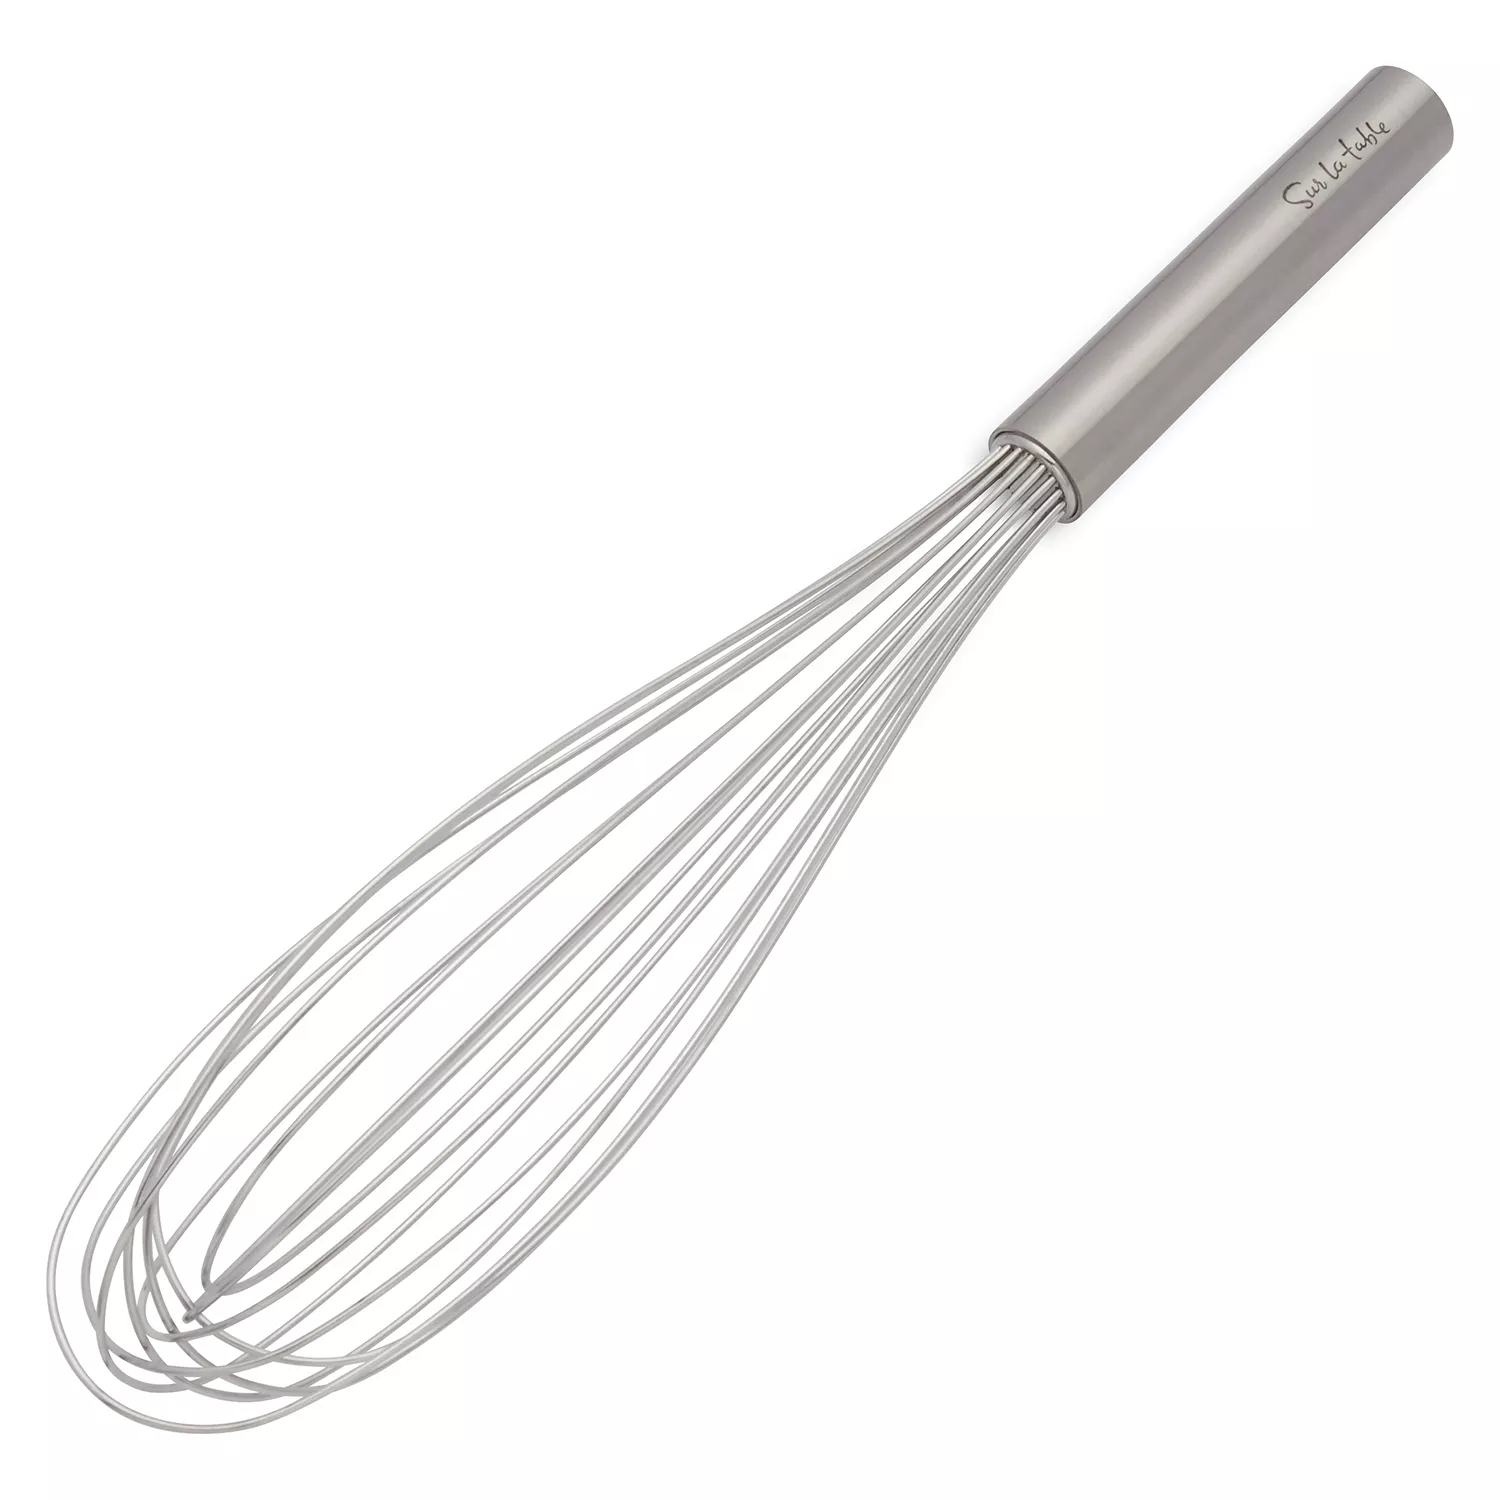 Red Silicone Whisk, 5.75